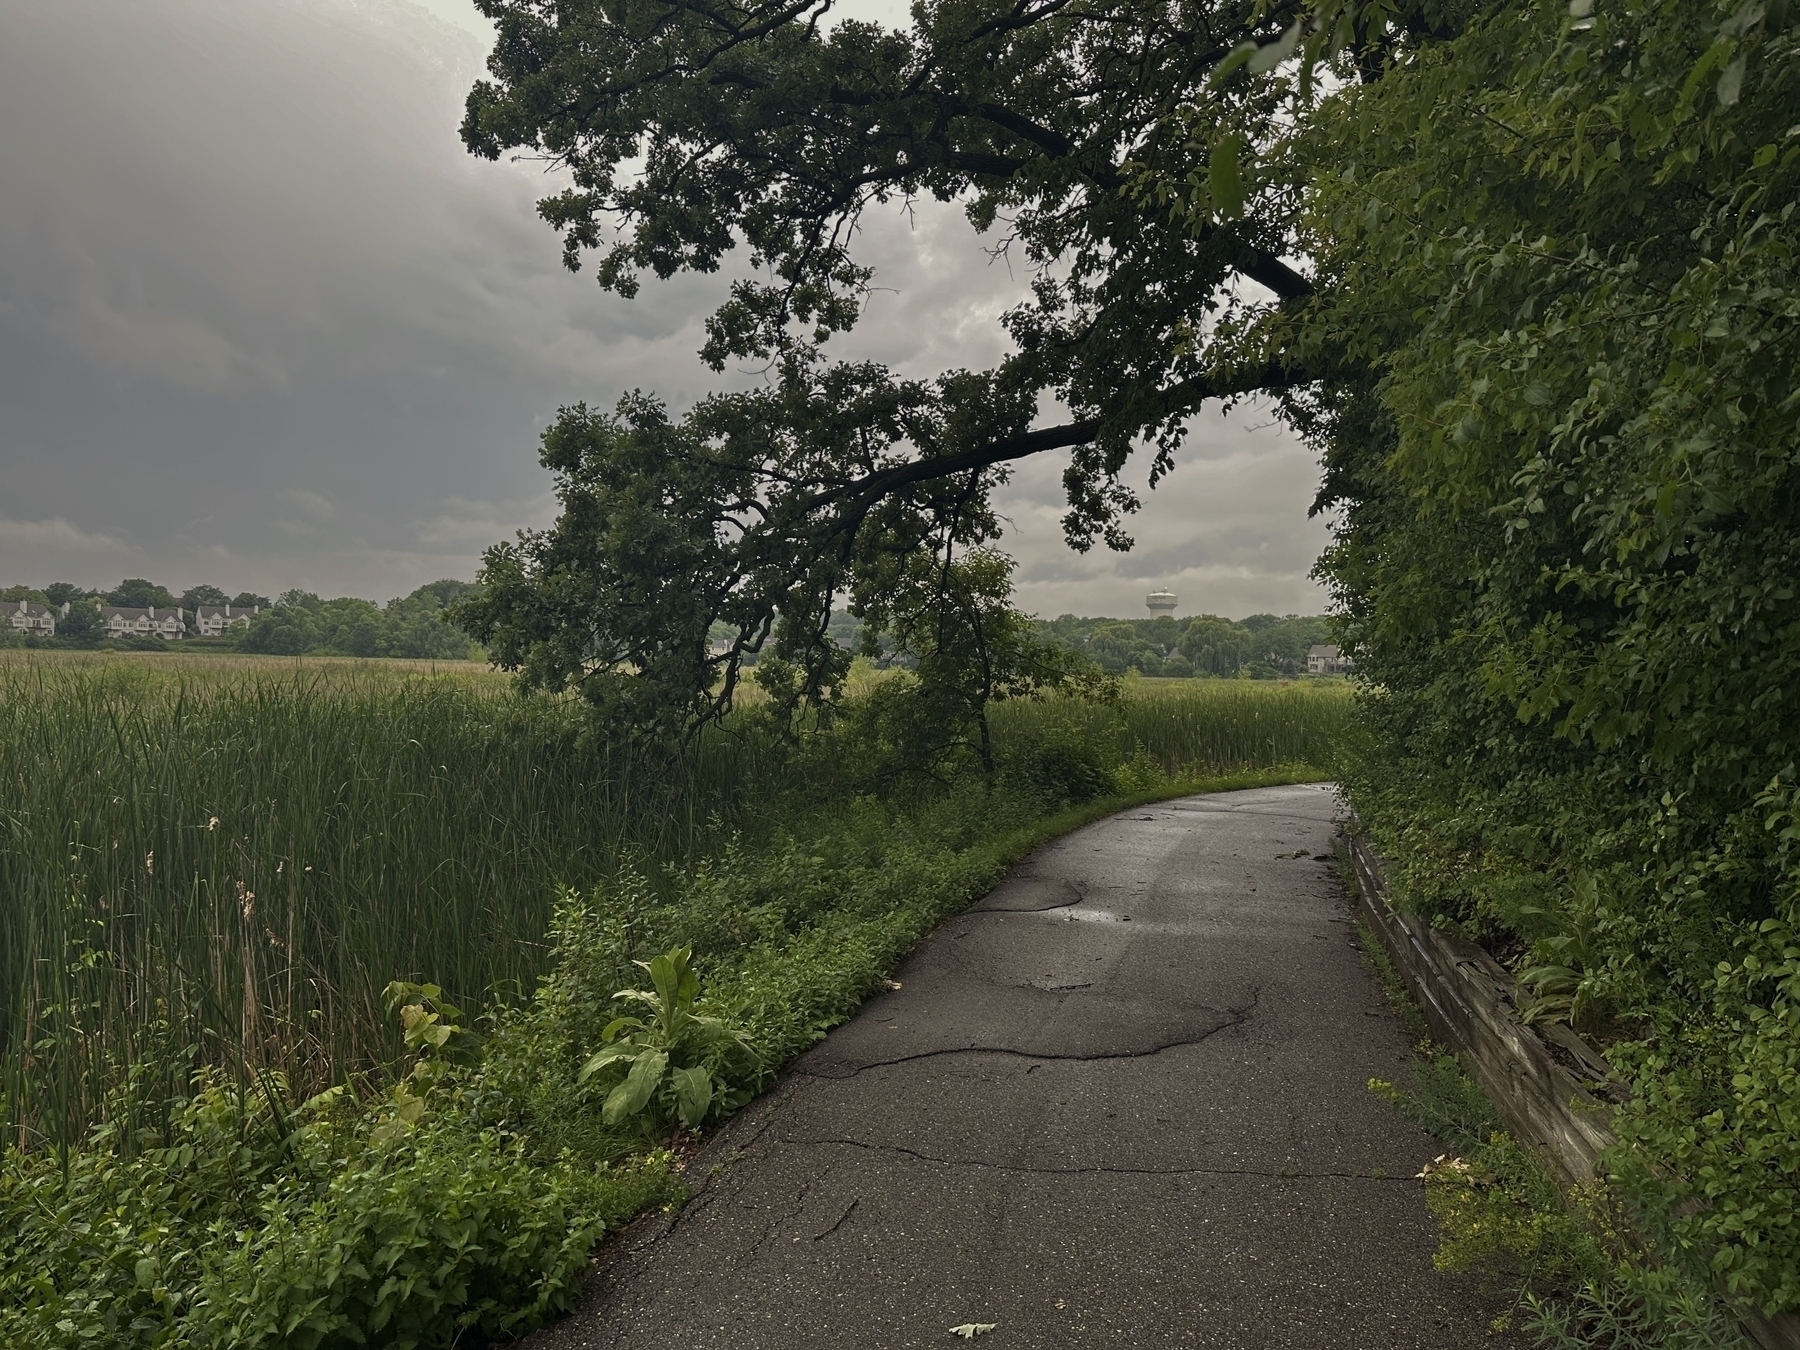 A cracked paved path curves through dense greenery with tall reeds on one side and leafy trees arching overhead under a cloudy sky, with distant houses and a water tower visible.